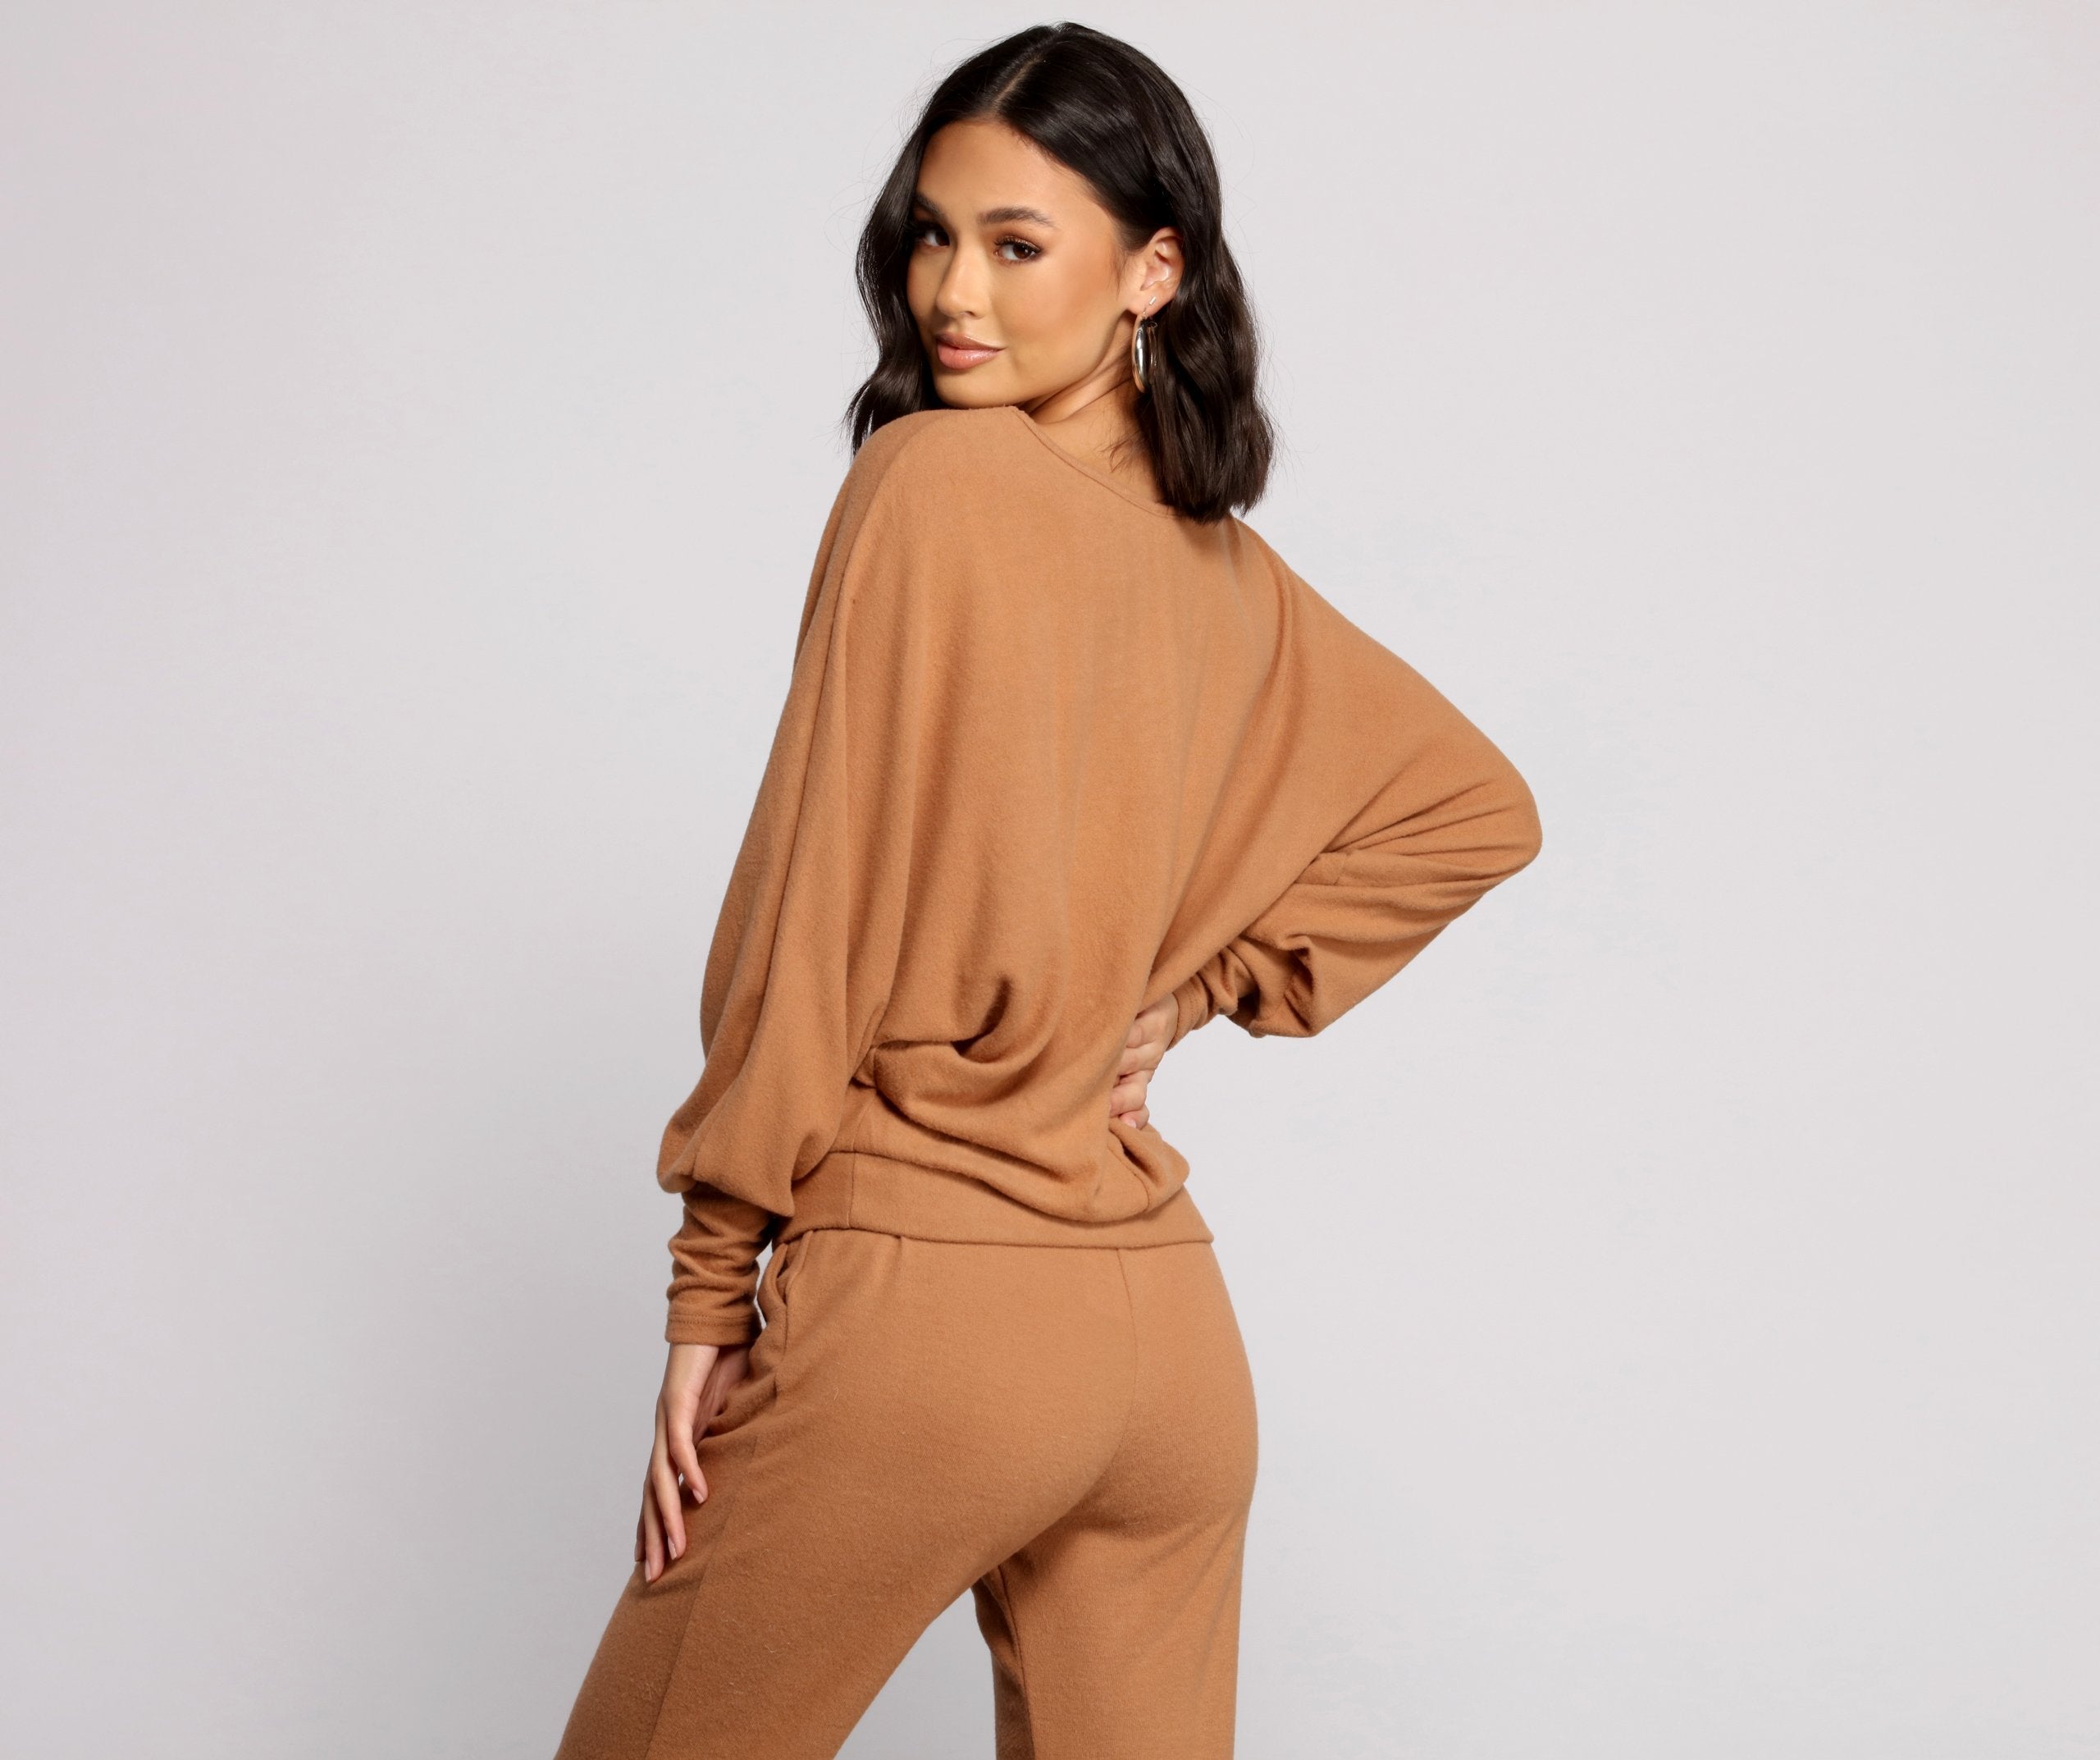 Keeping Knit' Basic Long Sleeve Top - Lady Occasions